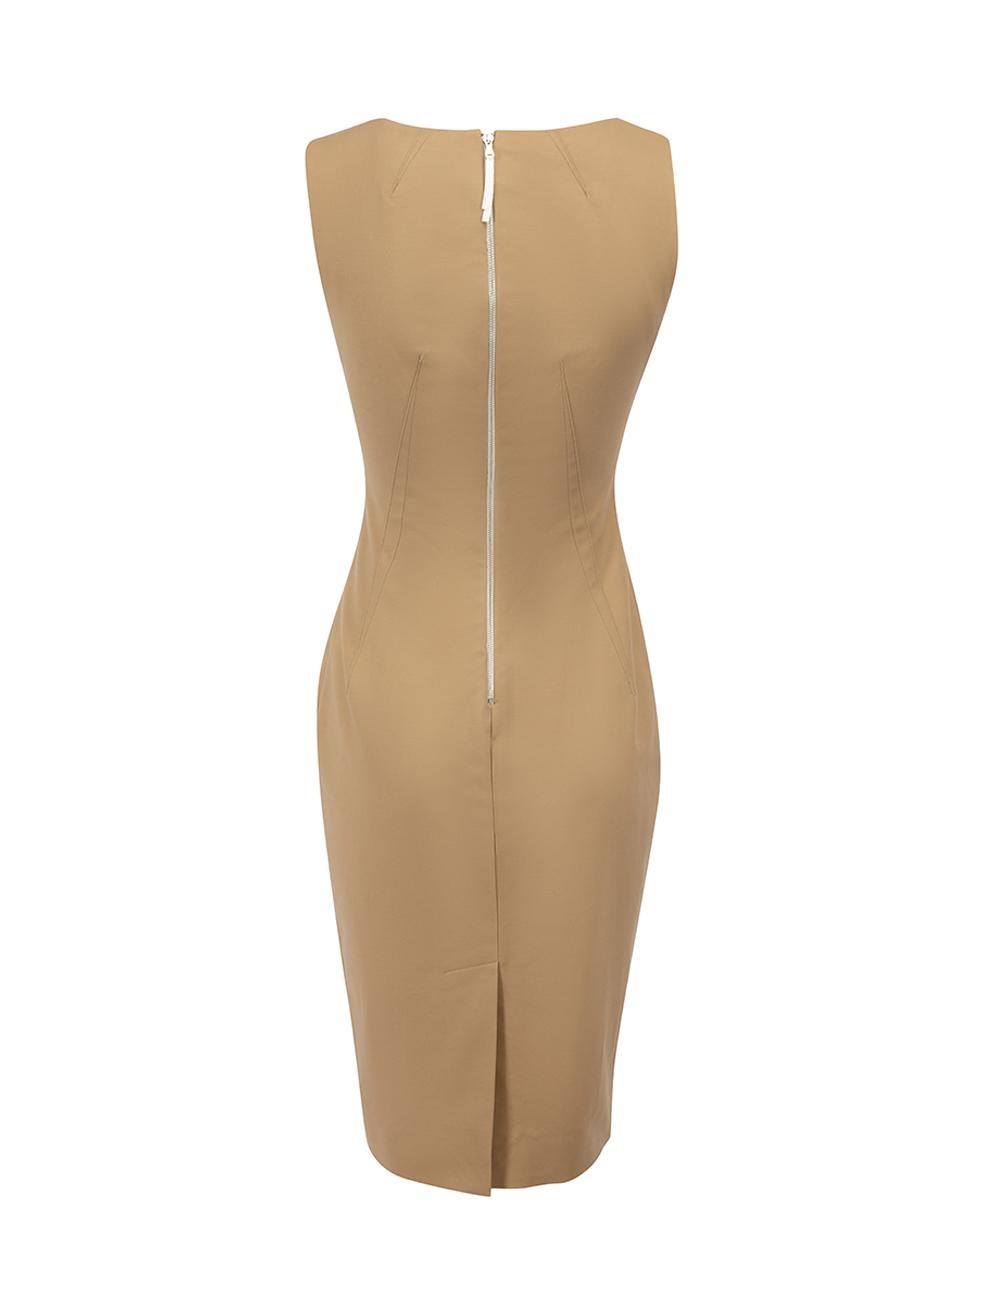 D&G Beige Midi Sleeveless Dress Size S In Good Condition In London, GB